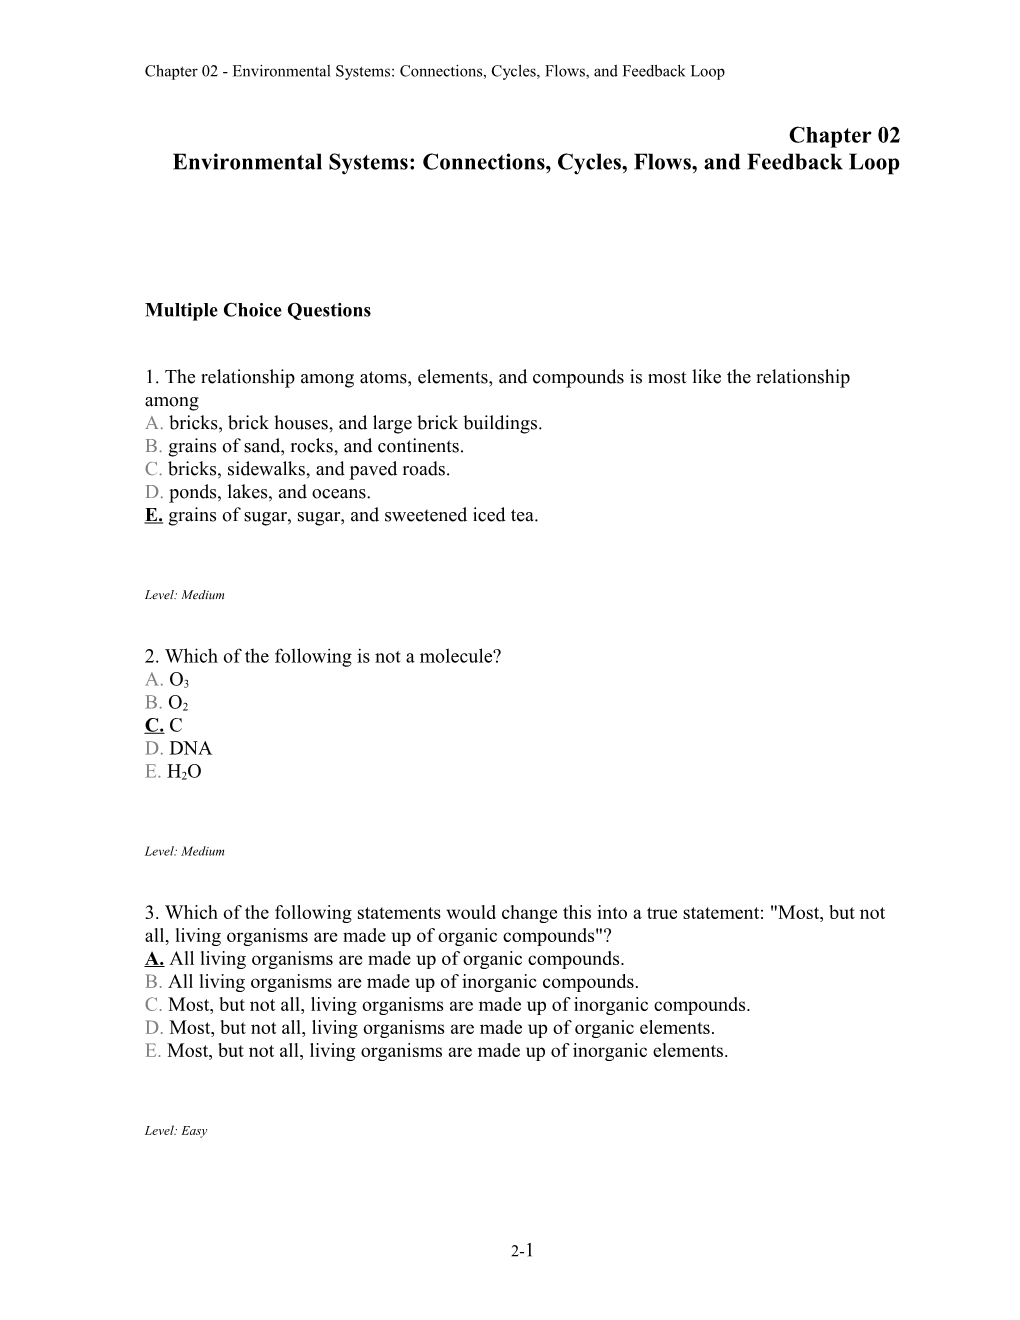 Chapter 02 Environmental Systems: Connections, Cycles, Flows, and Feedback Loop